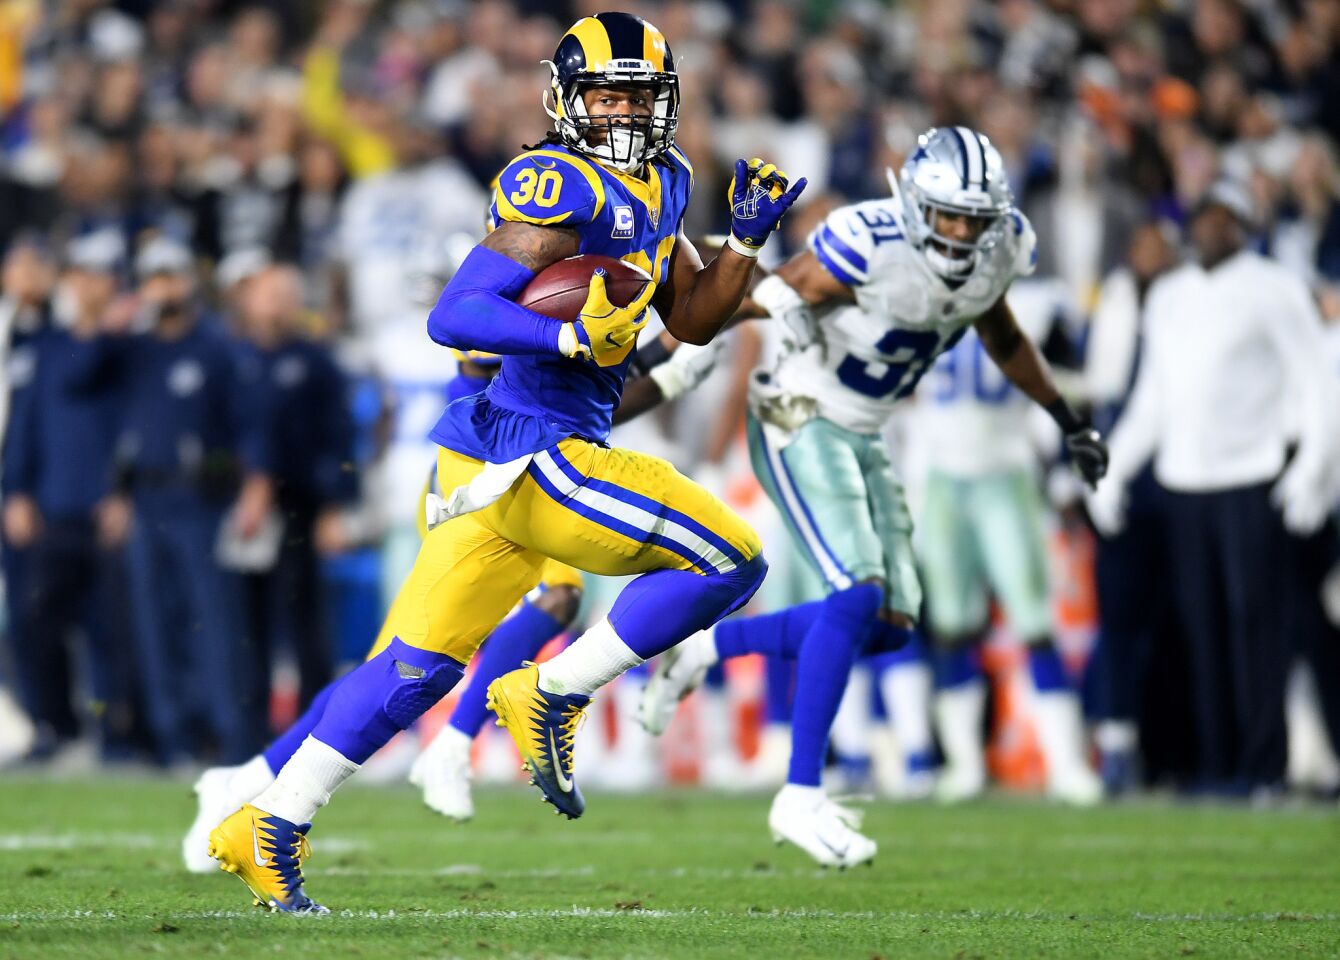 Rams running back Todd Gurley beats Dallas Cowboys cornerback Byron Jones for a 35-yard touchdown during the second quarter.